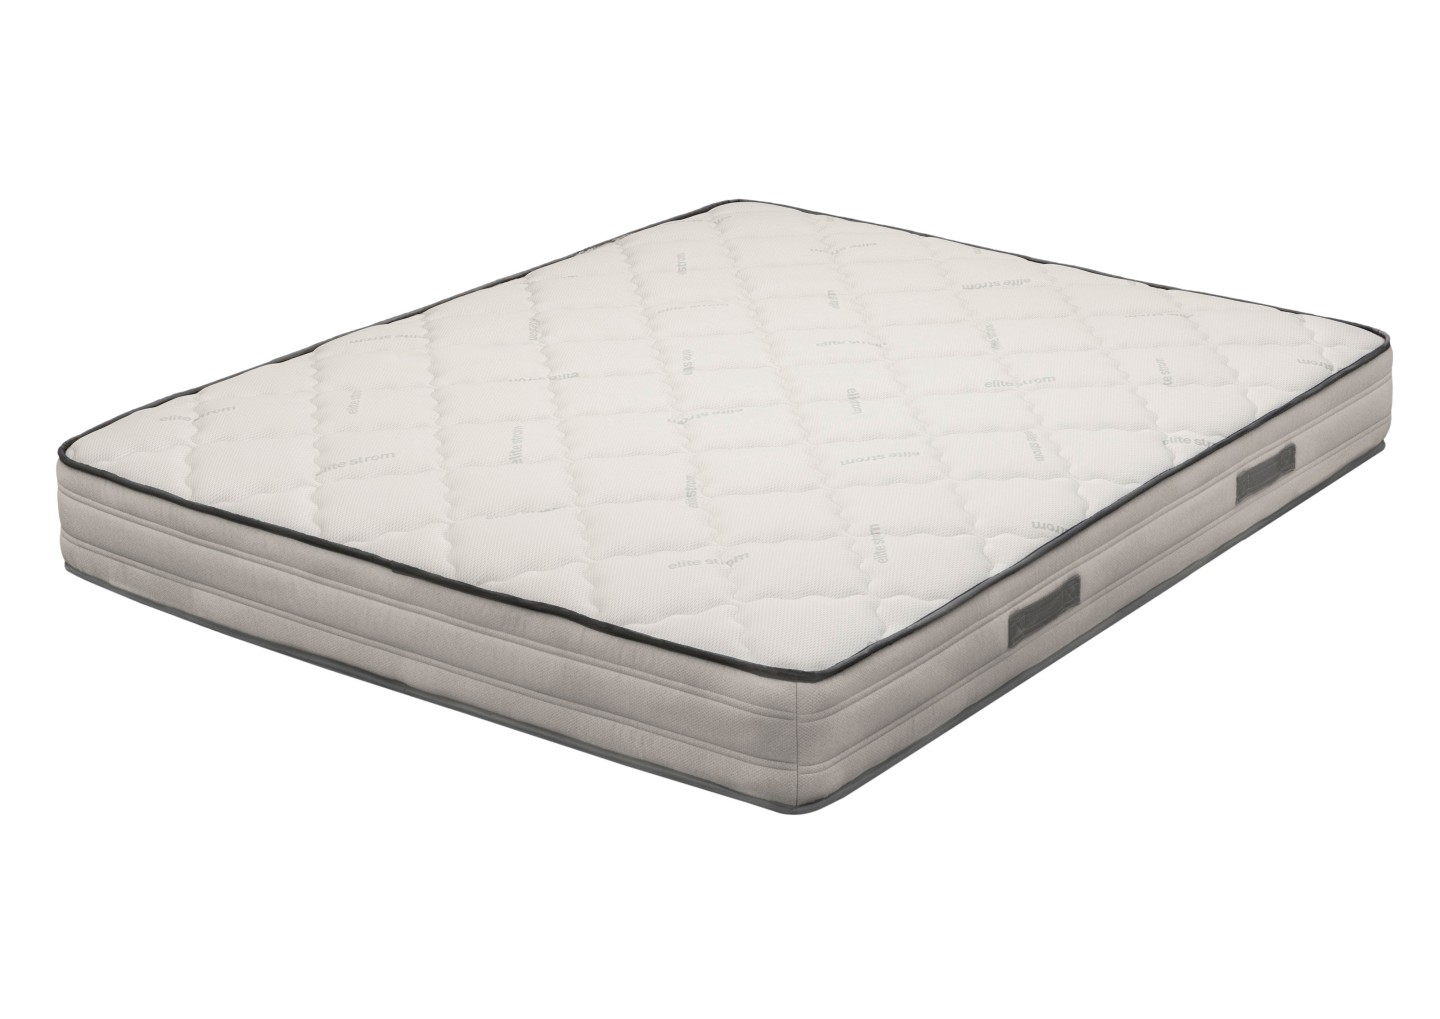 THE PHYSICAL ANATOMIC MATTRESS by Elite Strom